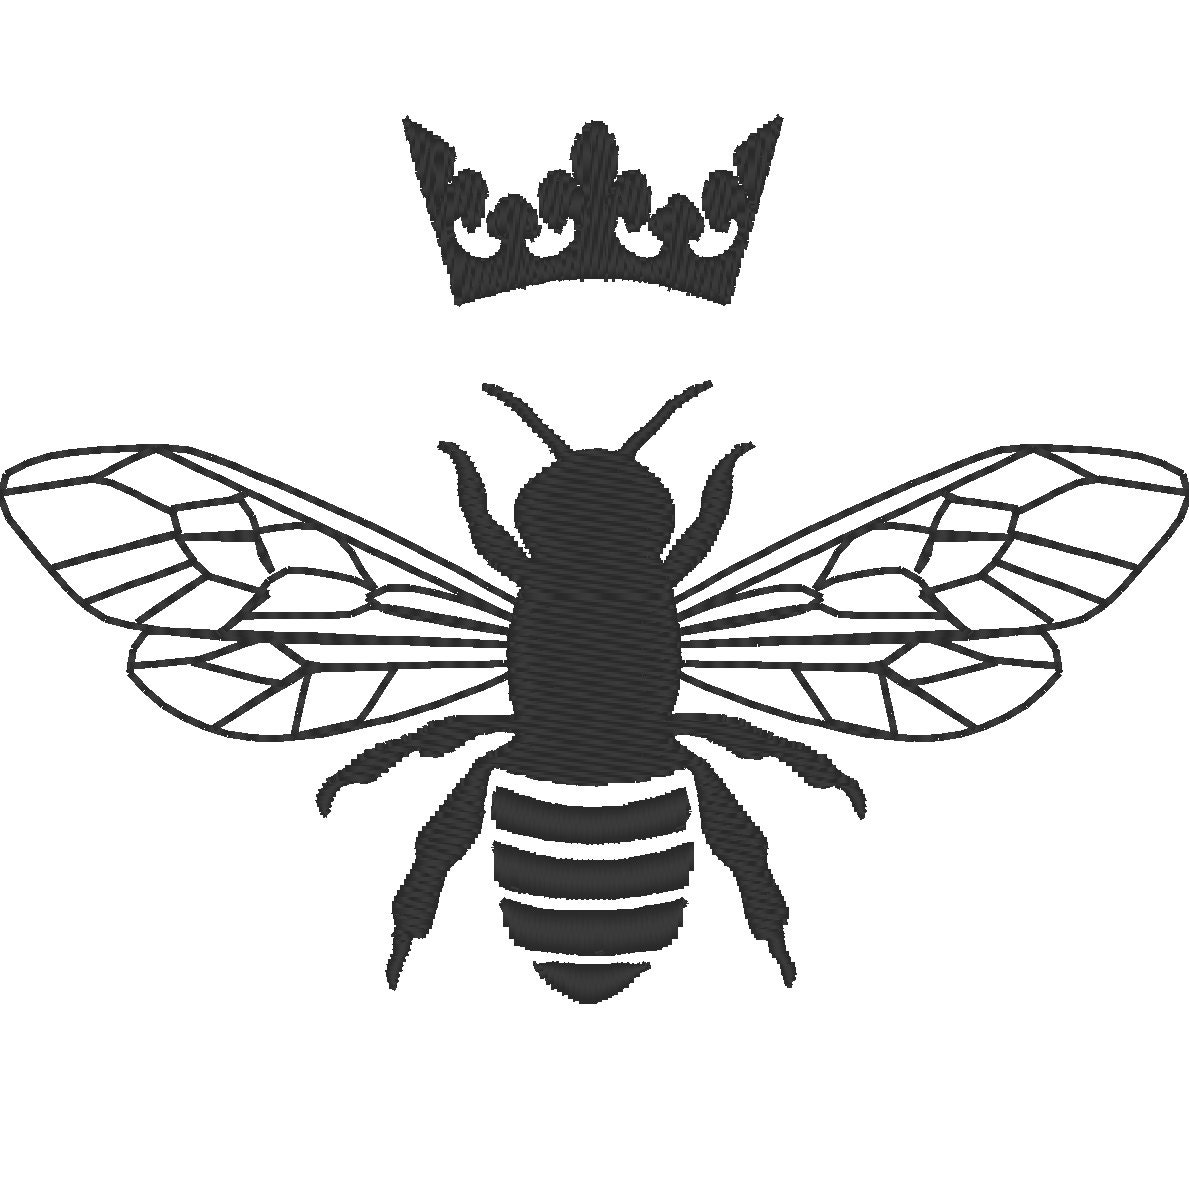 Download Queen Bee embroidery fill stitch embroidery design Queen ...